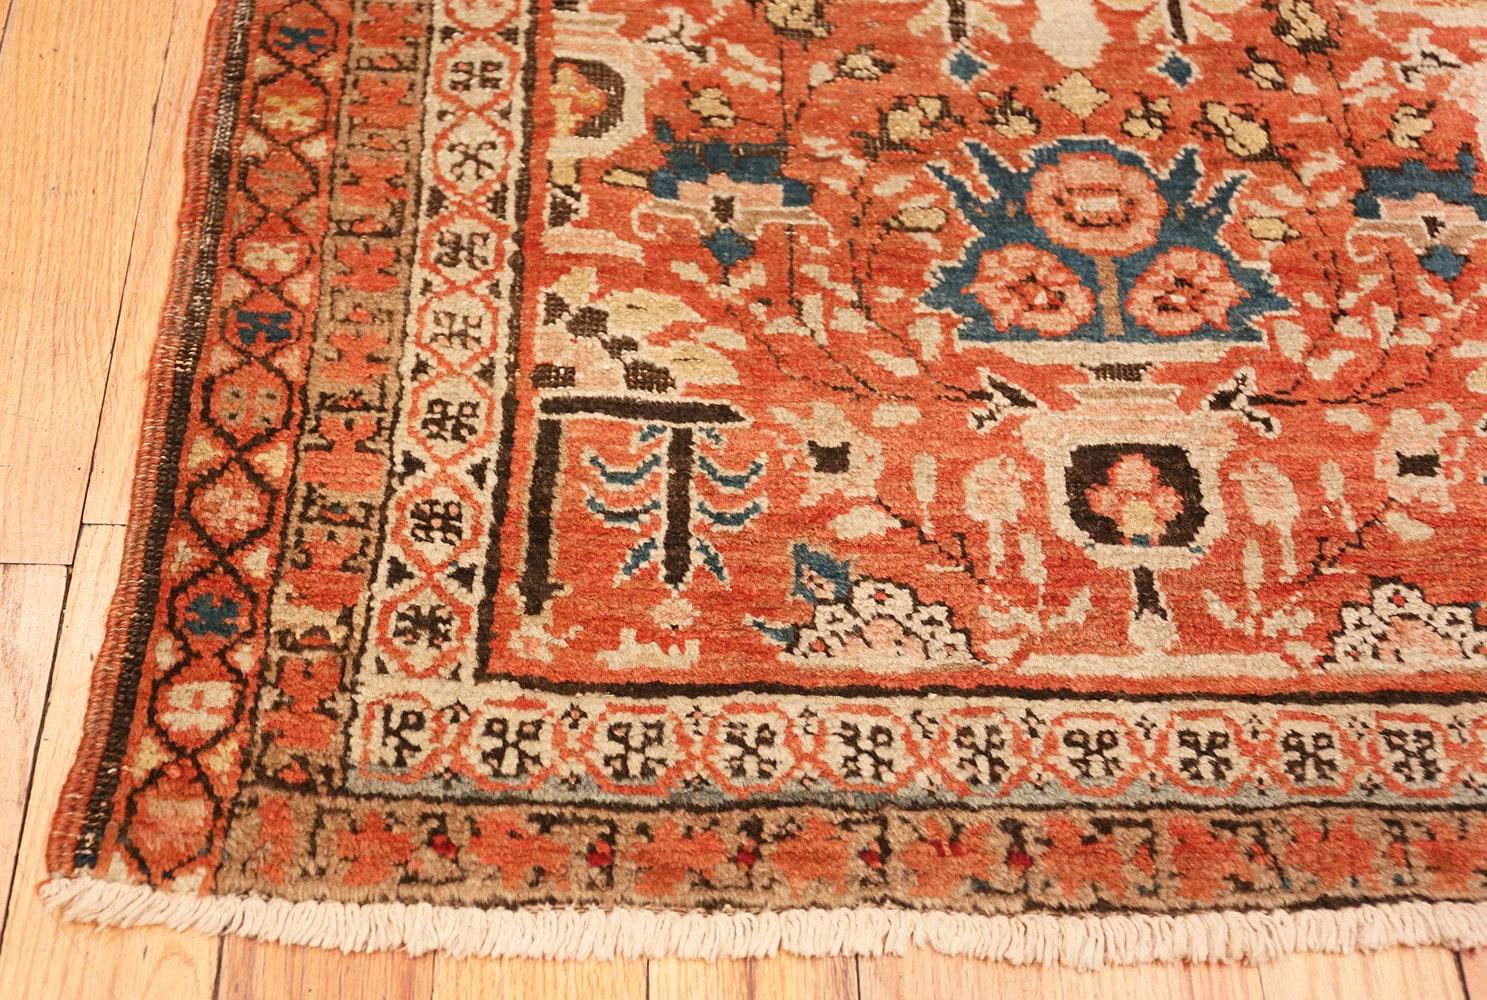 Hand-Knotted Antique Persian Bakshaish Rug. Size: 3 ft x 4 ft 4 in (0.91 m x 1.32 m)